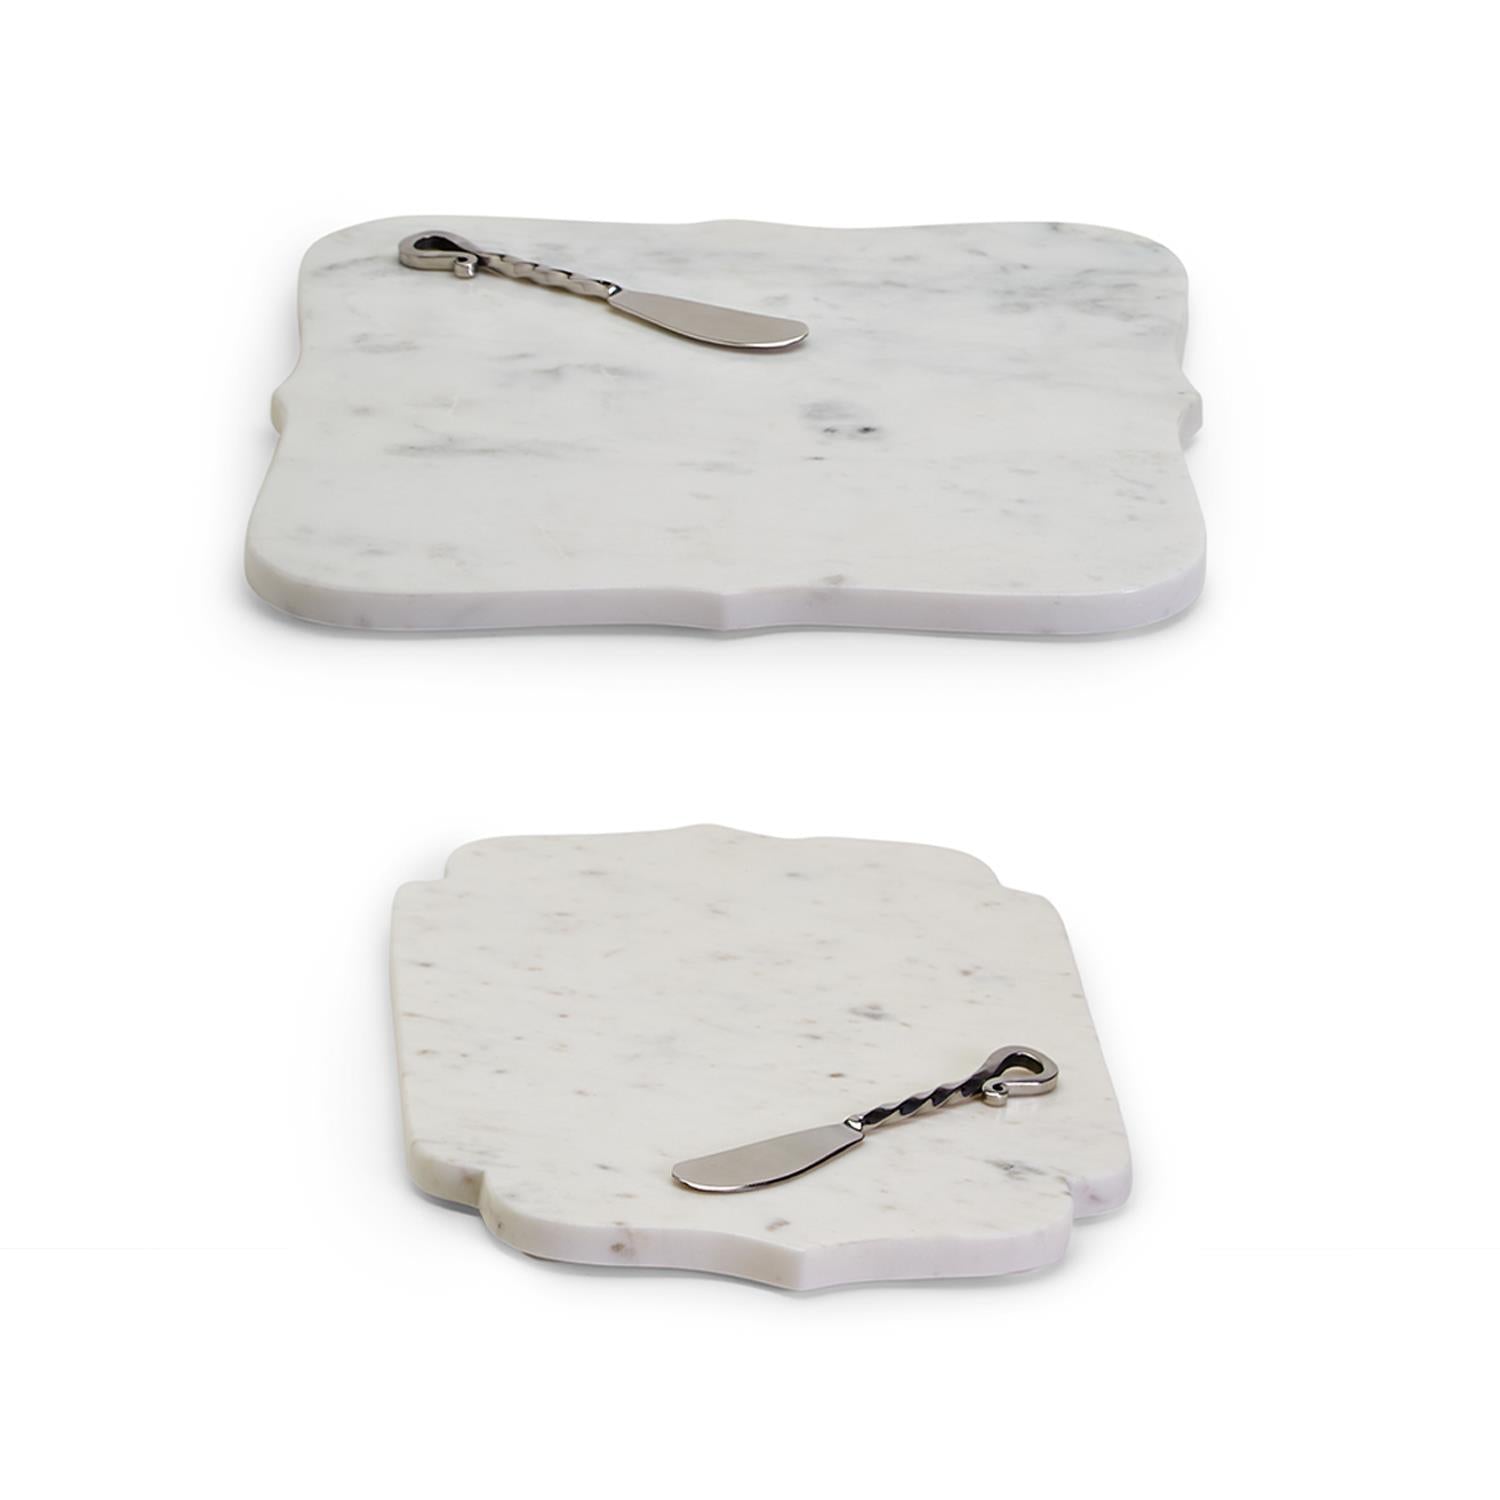 Marble Arabesque Serving Tray with Cheese Spreader